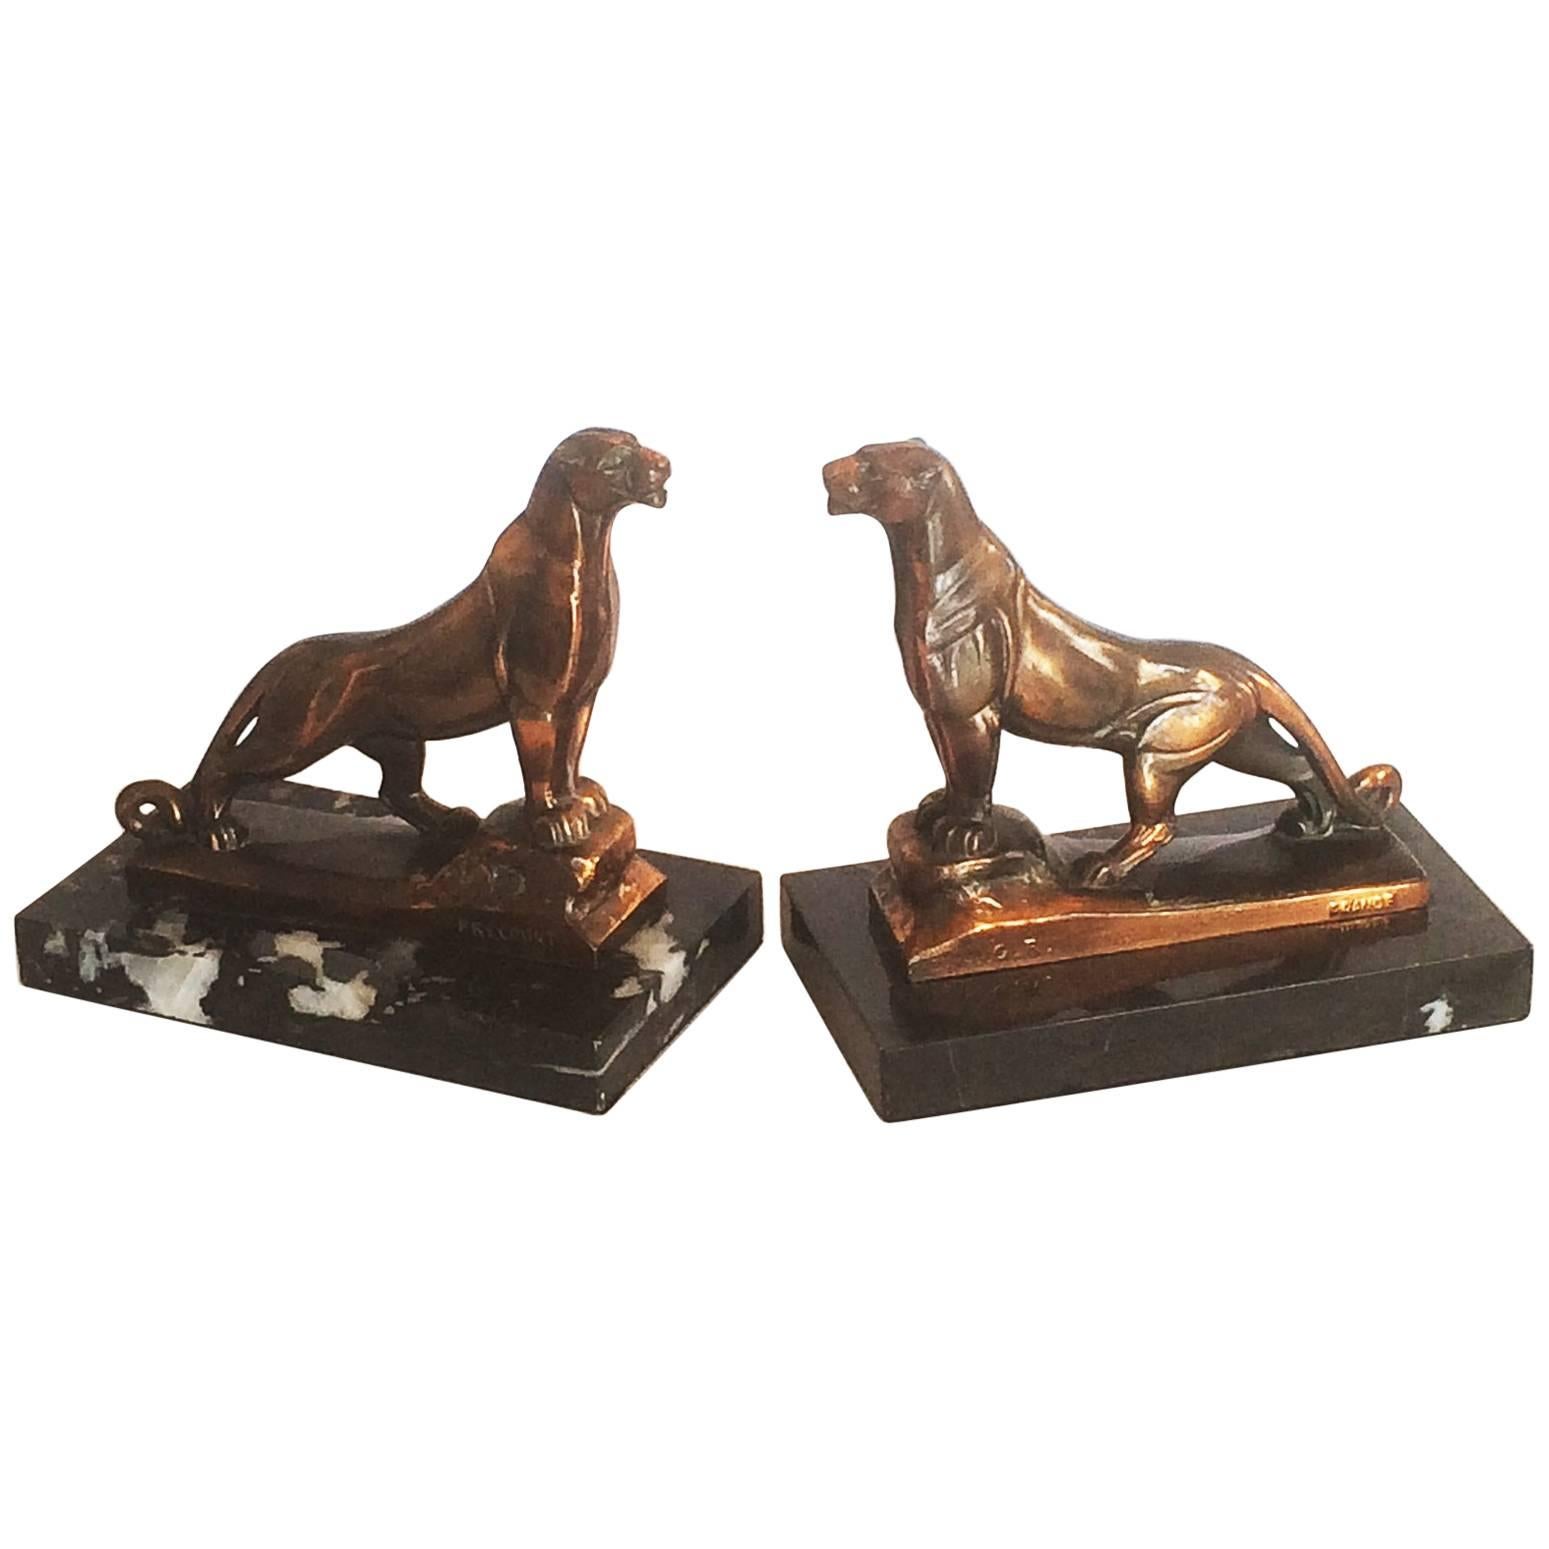 Art Deco Pair of Panther Bookends by Frecourt